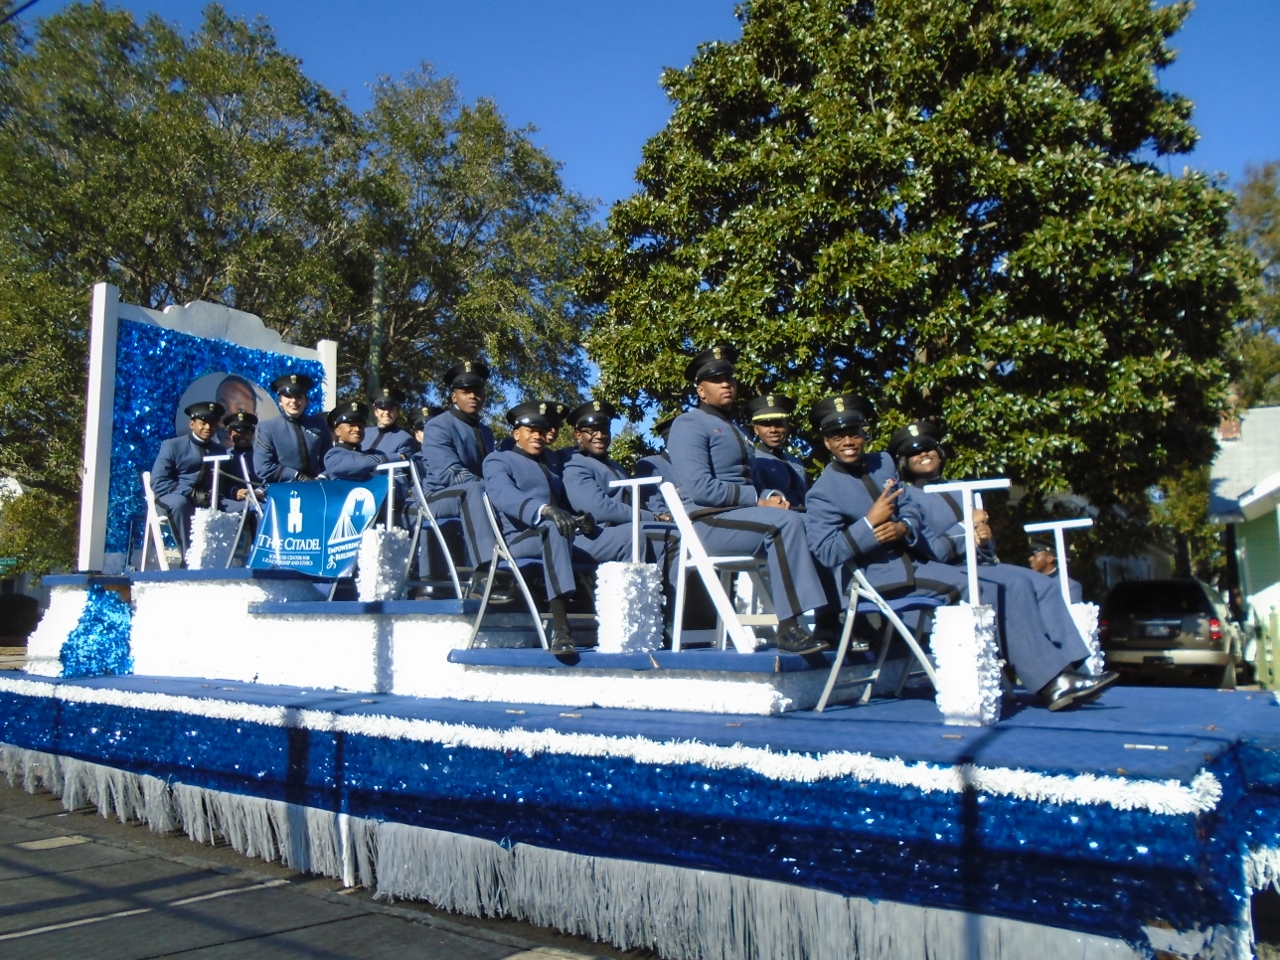 Parades, programs and presentations Citadel finds new ways to